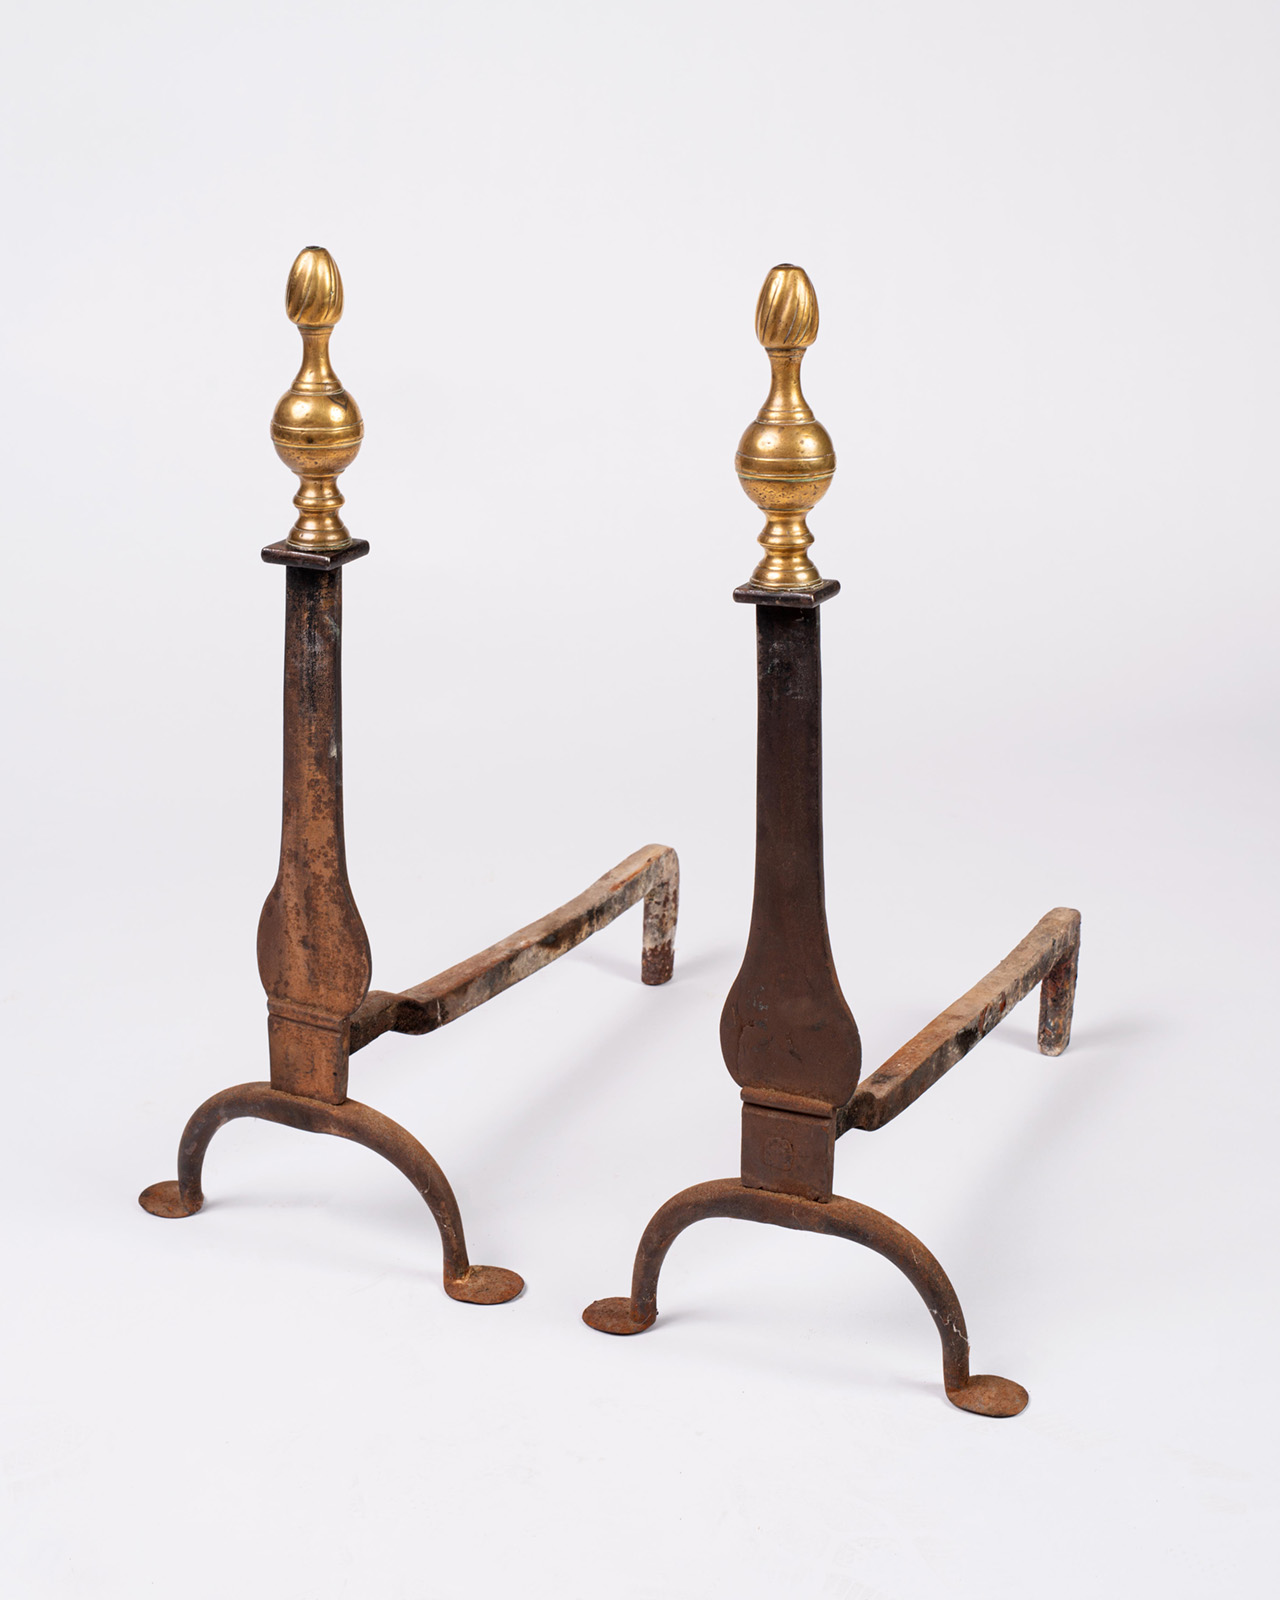 A fine pair of American andirons